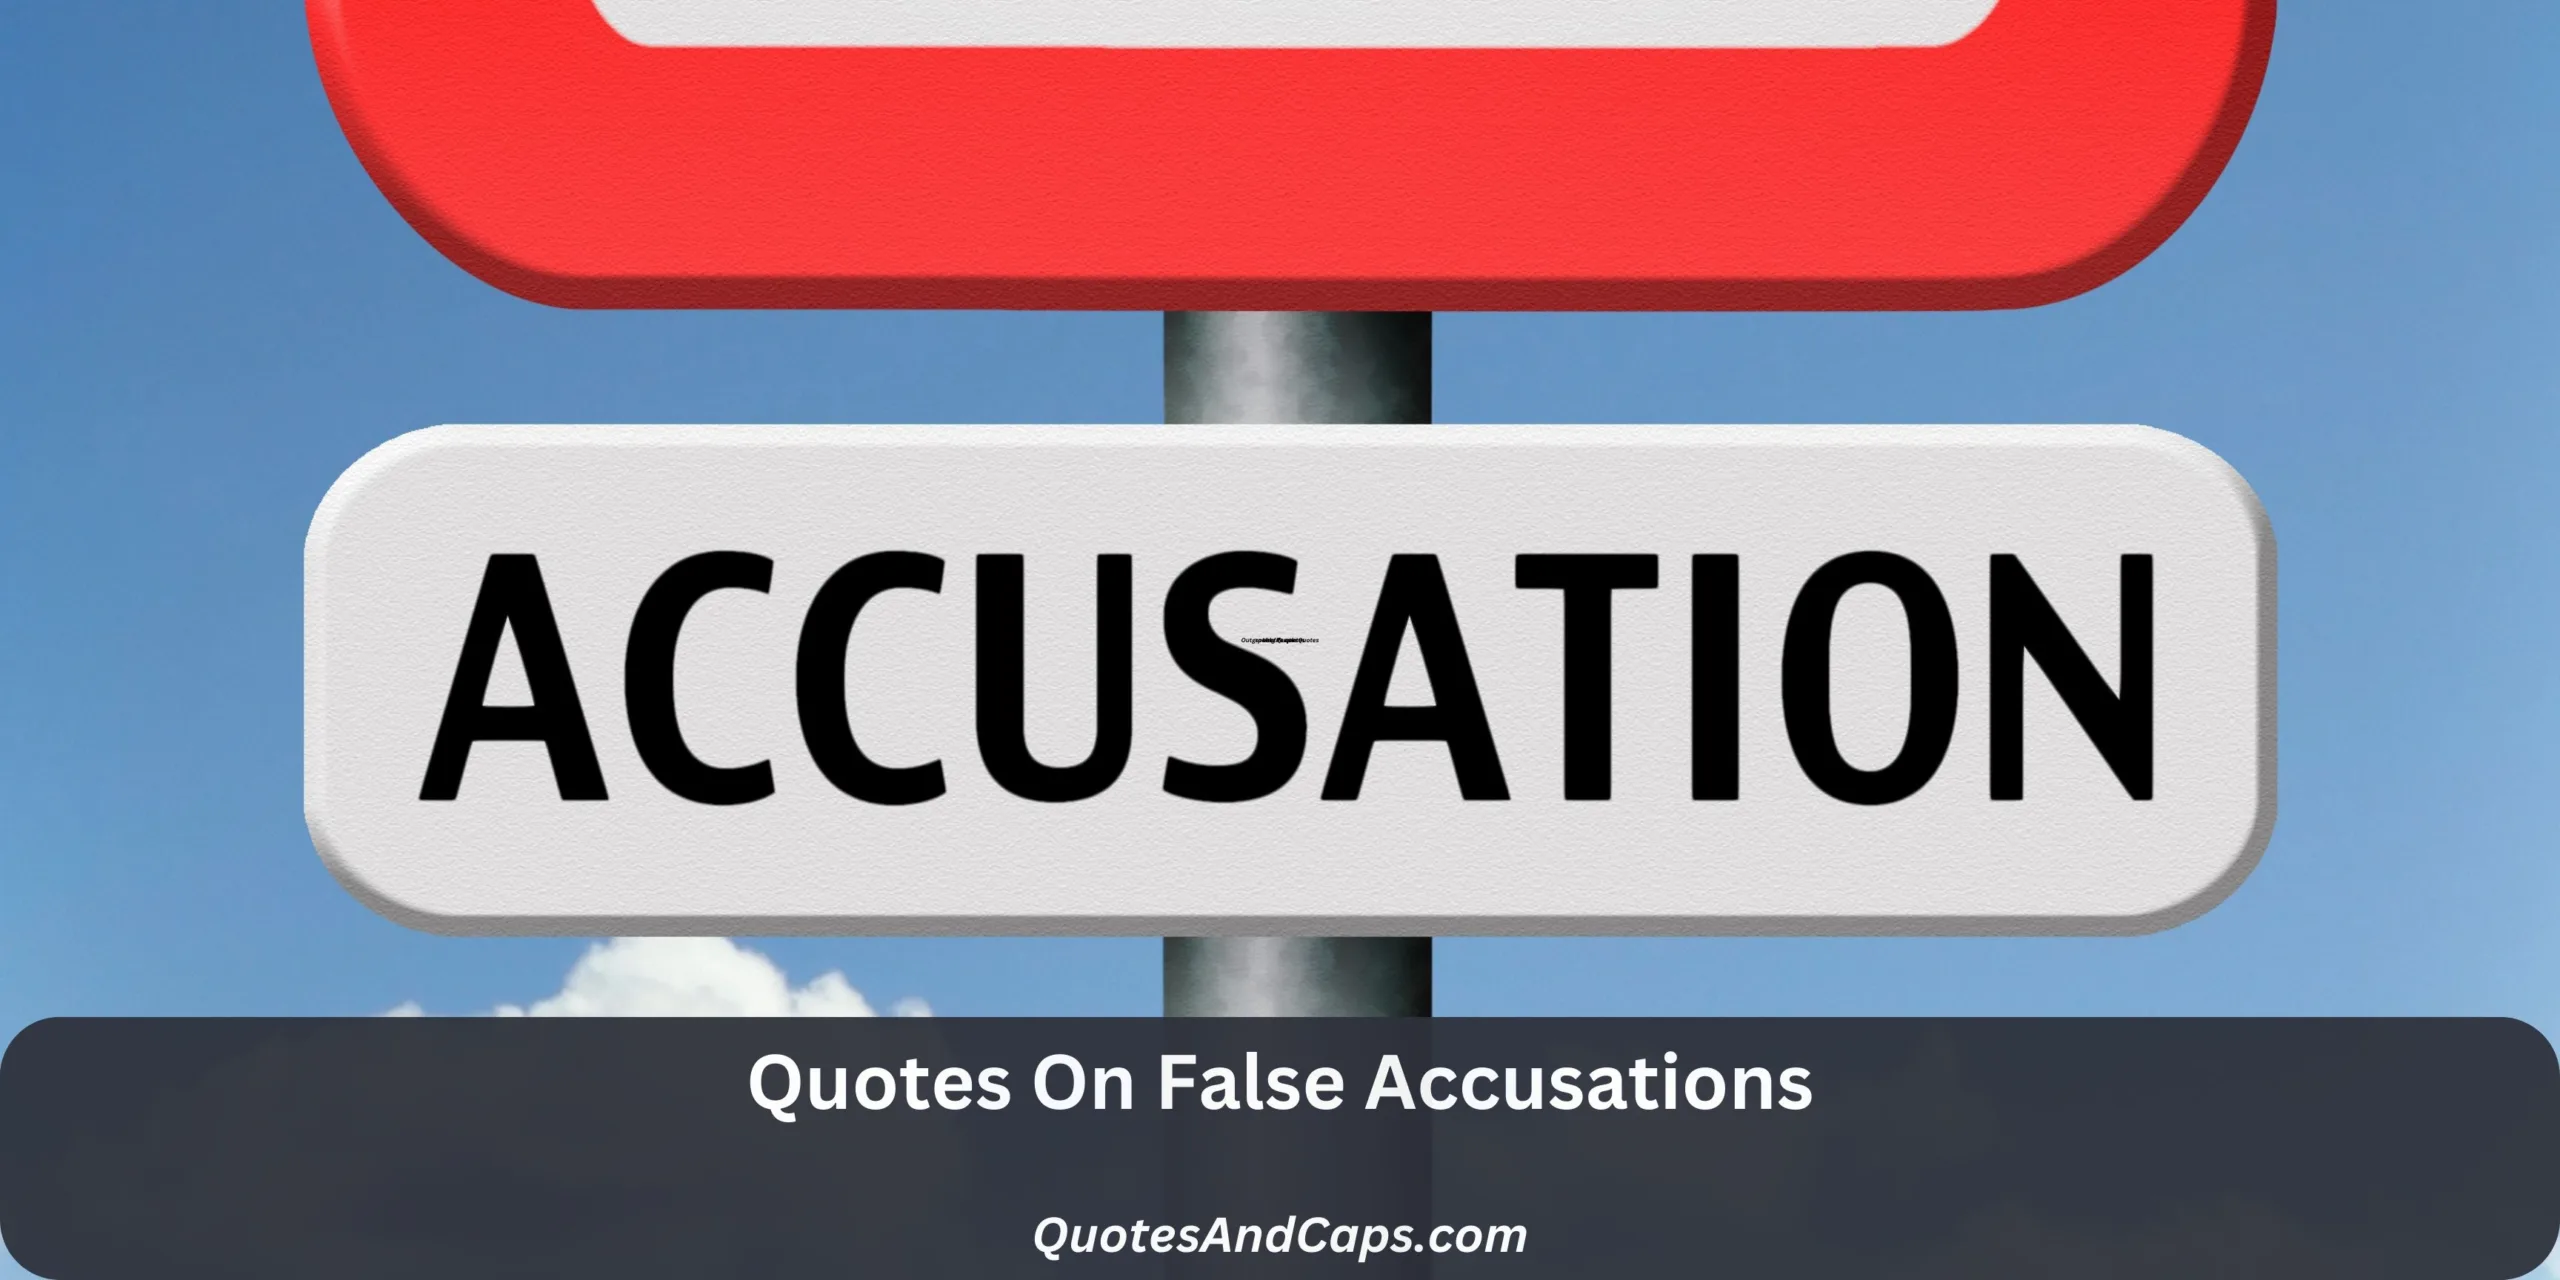 Quotes On False Accusations